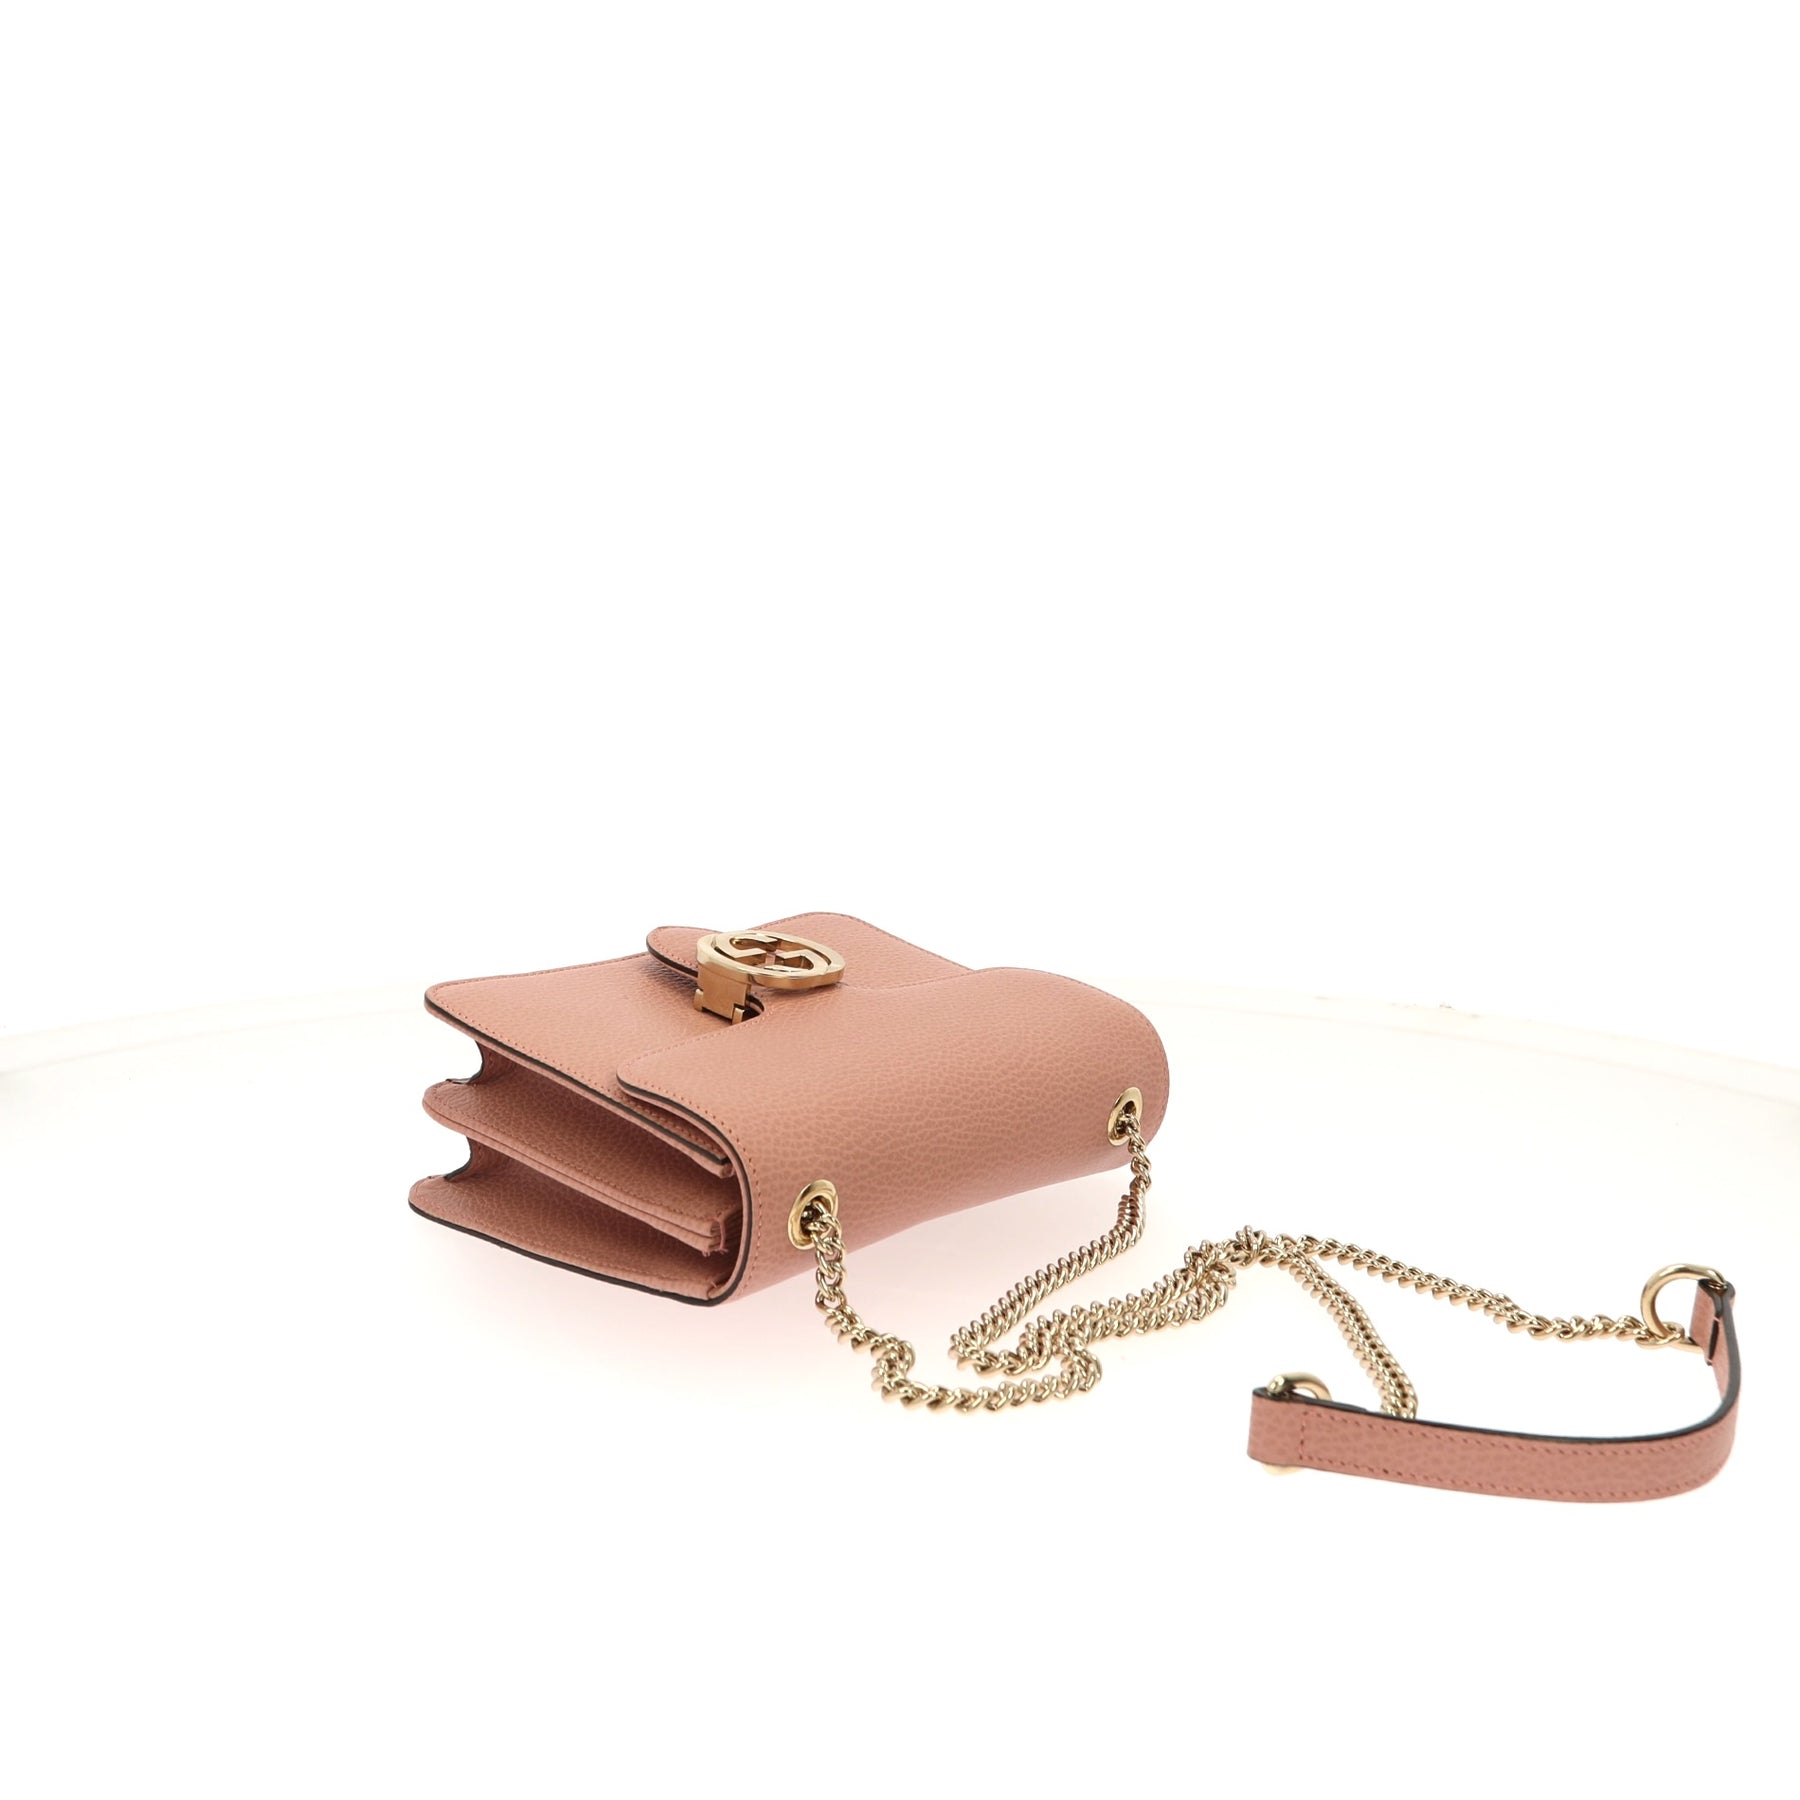 Gucci Interlocking Chain Pink Leather Cross Body Bag designed and made for  women who want to be noticed in society. #Gucci #GucciBa…